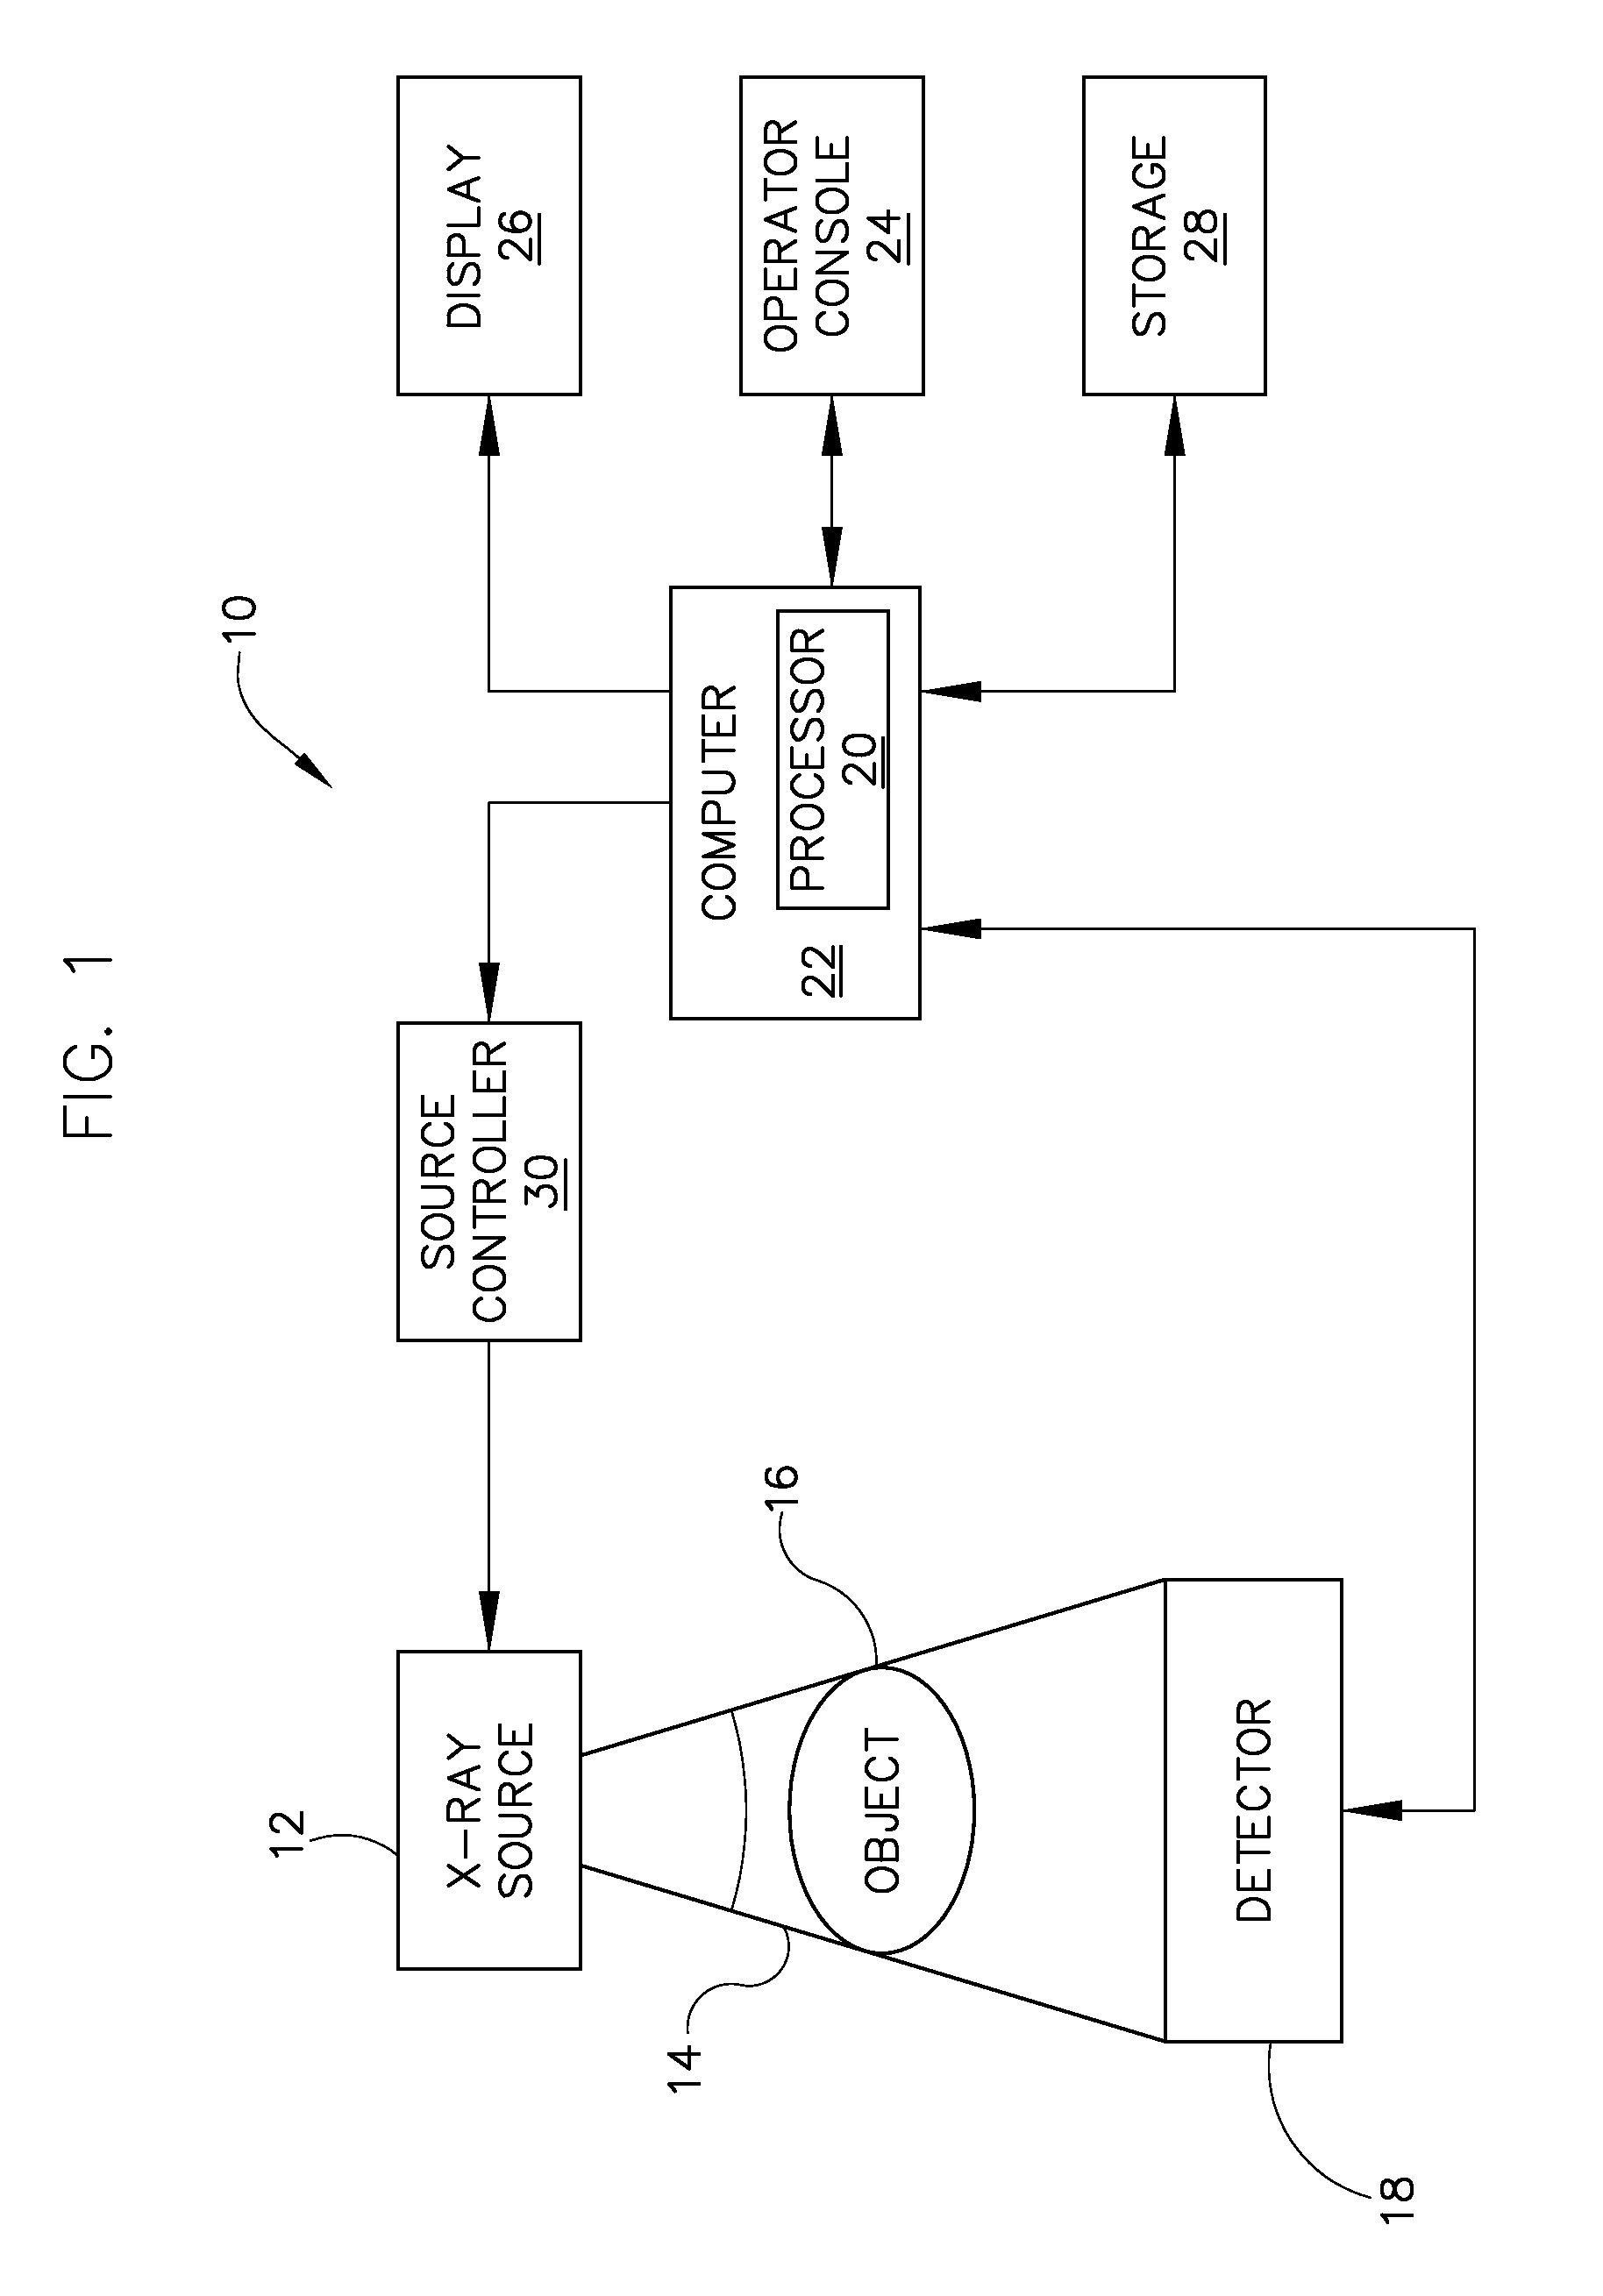 Method and apparatus of differential pumping in an x-ray tube